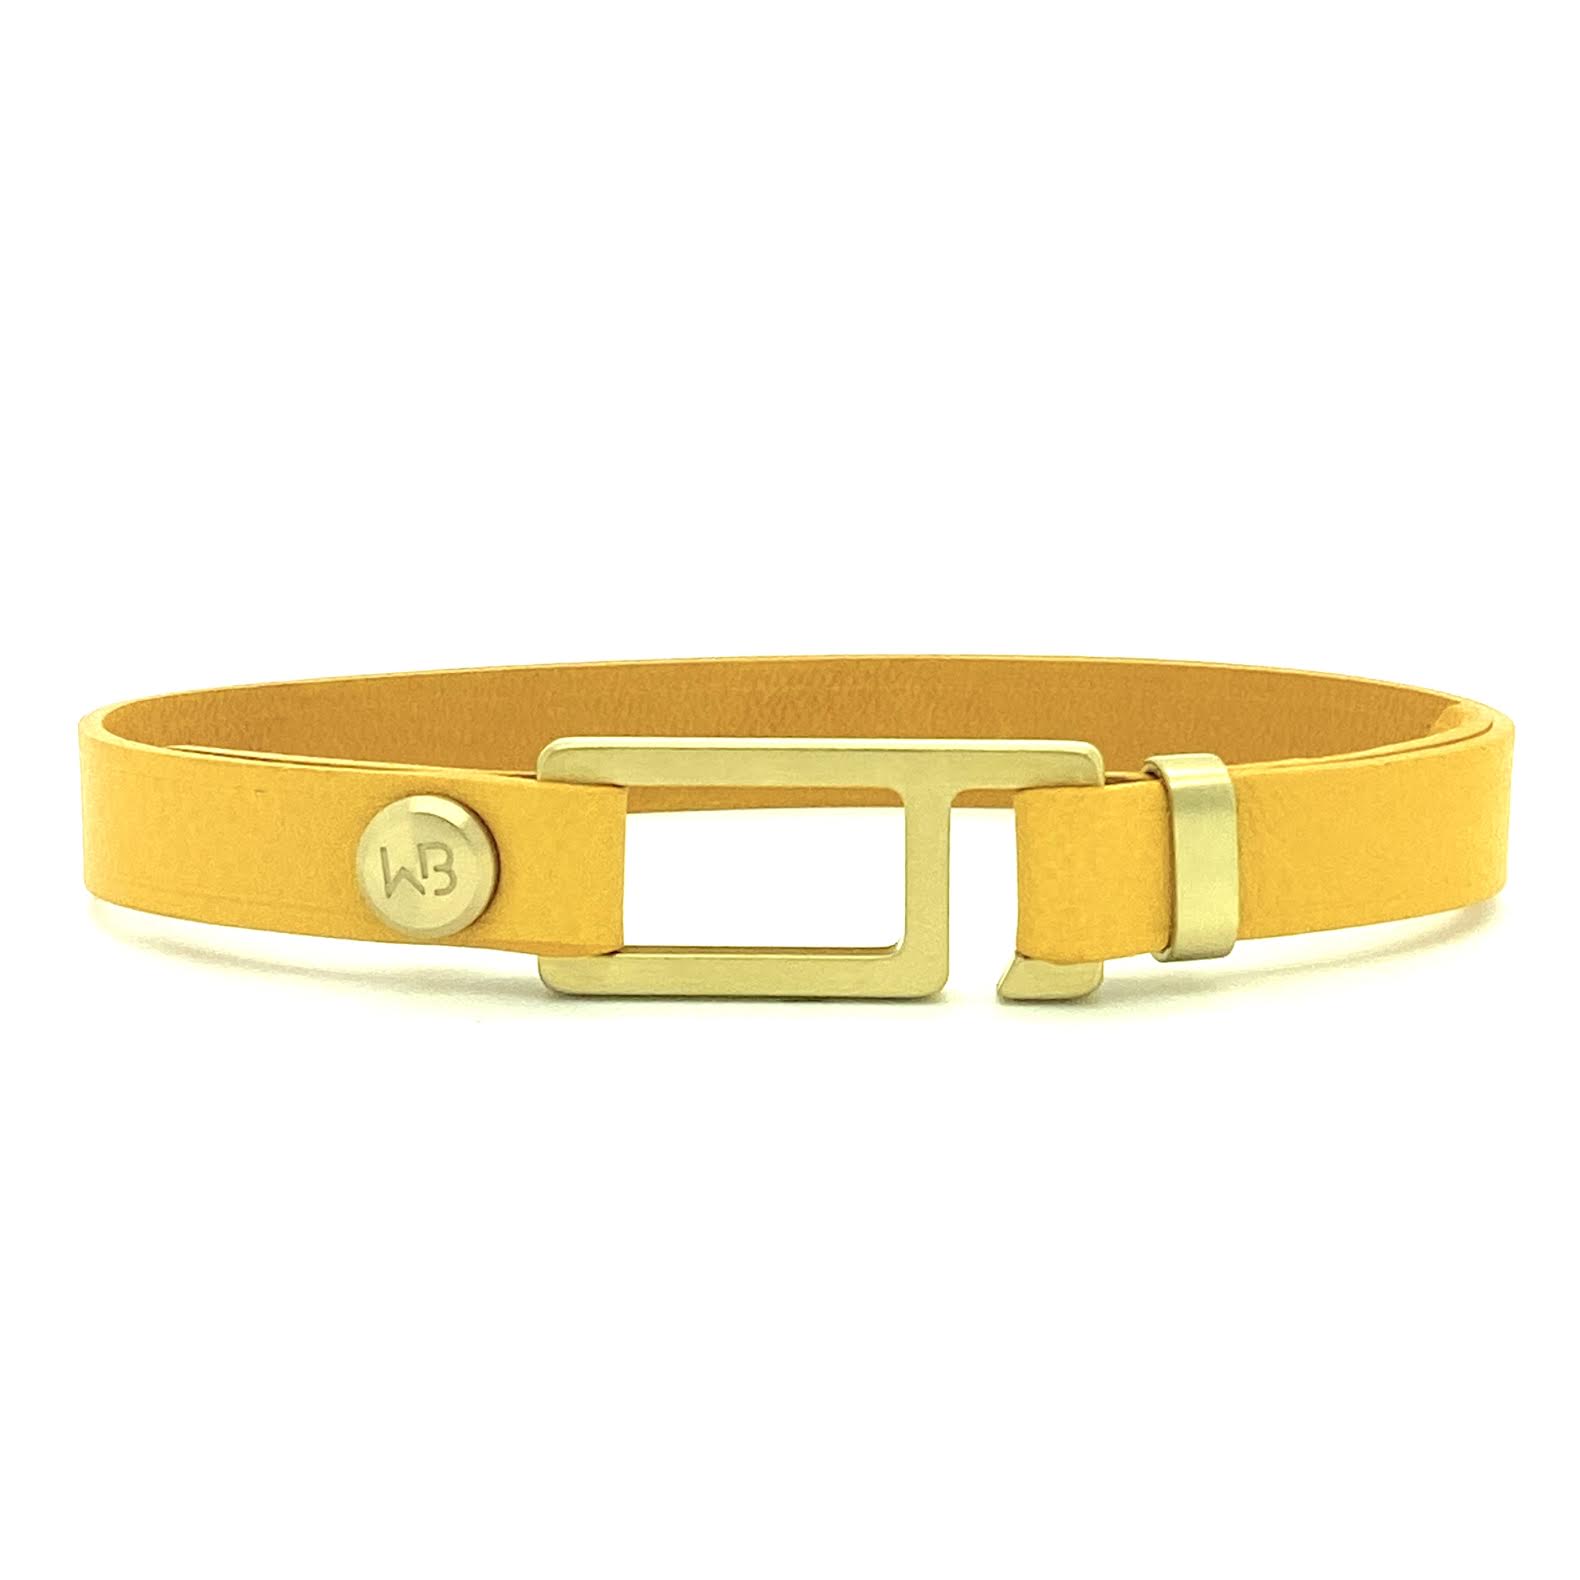 Our striking Buttero yellow Italian leather bracelet is paired perfectly with our artisan designed, lightly brushed hardware. Your hardware choices include Rose Gold, Yellow Gold, Stainless Steel or Black Ceramic. This adjustable size bracelet is a distinctive piece worn alone or with a WristBend stacking bracelet. Made by WristBend